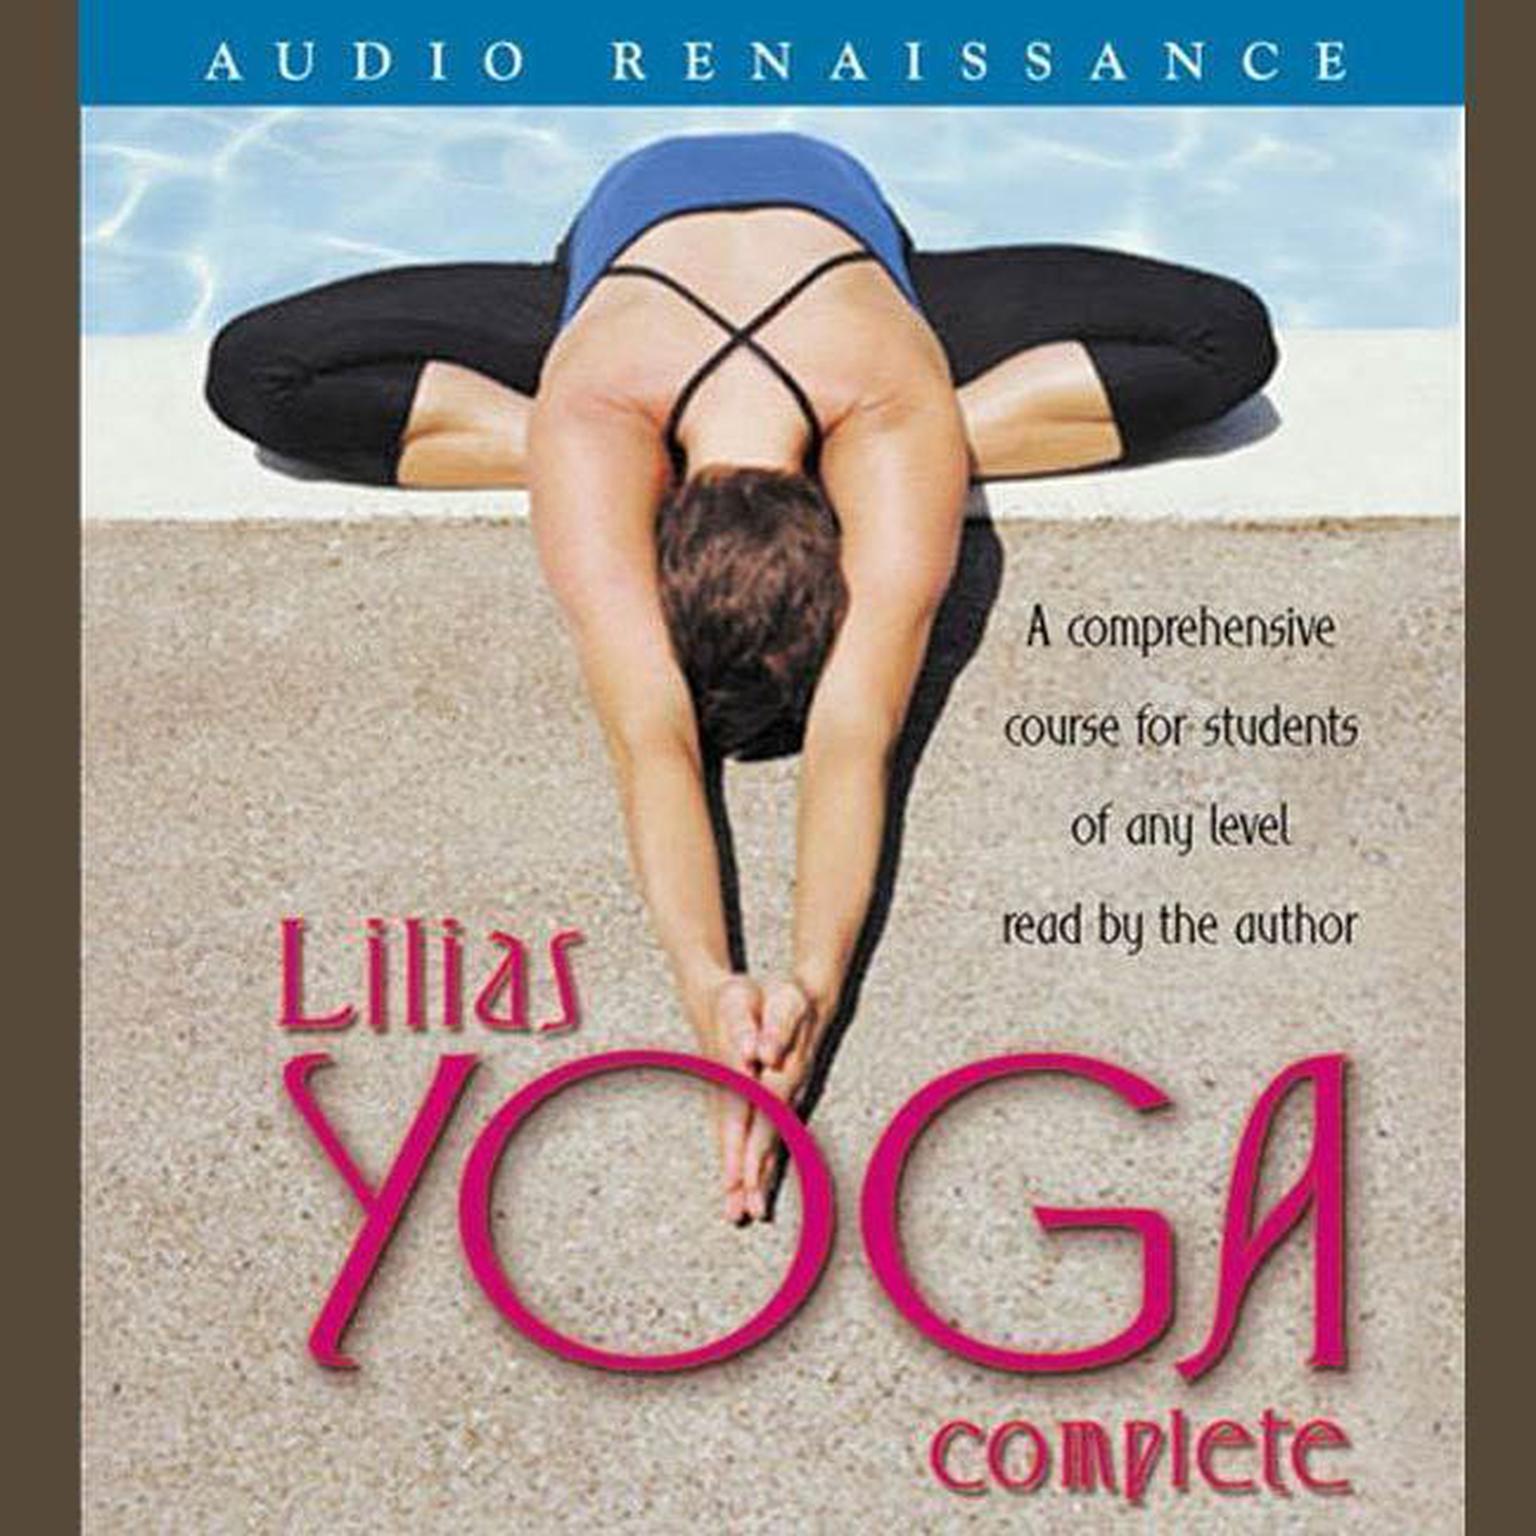 Lilias Yoga Complete: A Full Course for Beginning and Advanced Students Audiobook, by Lilias Folan